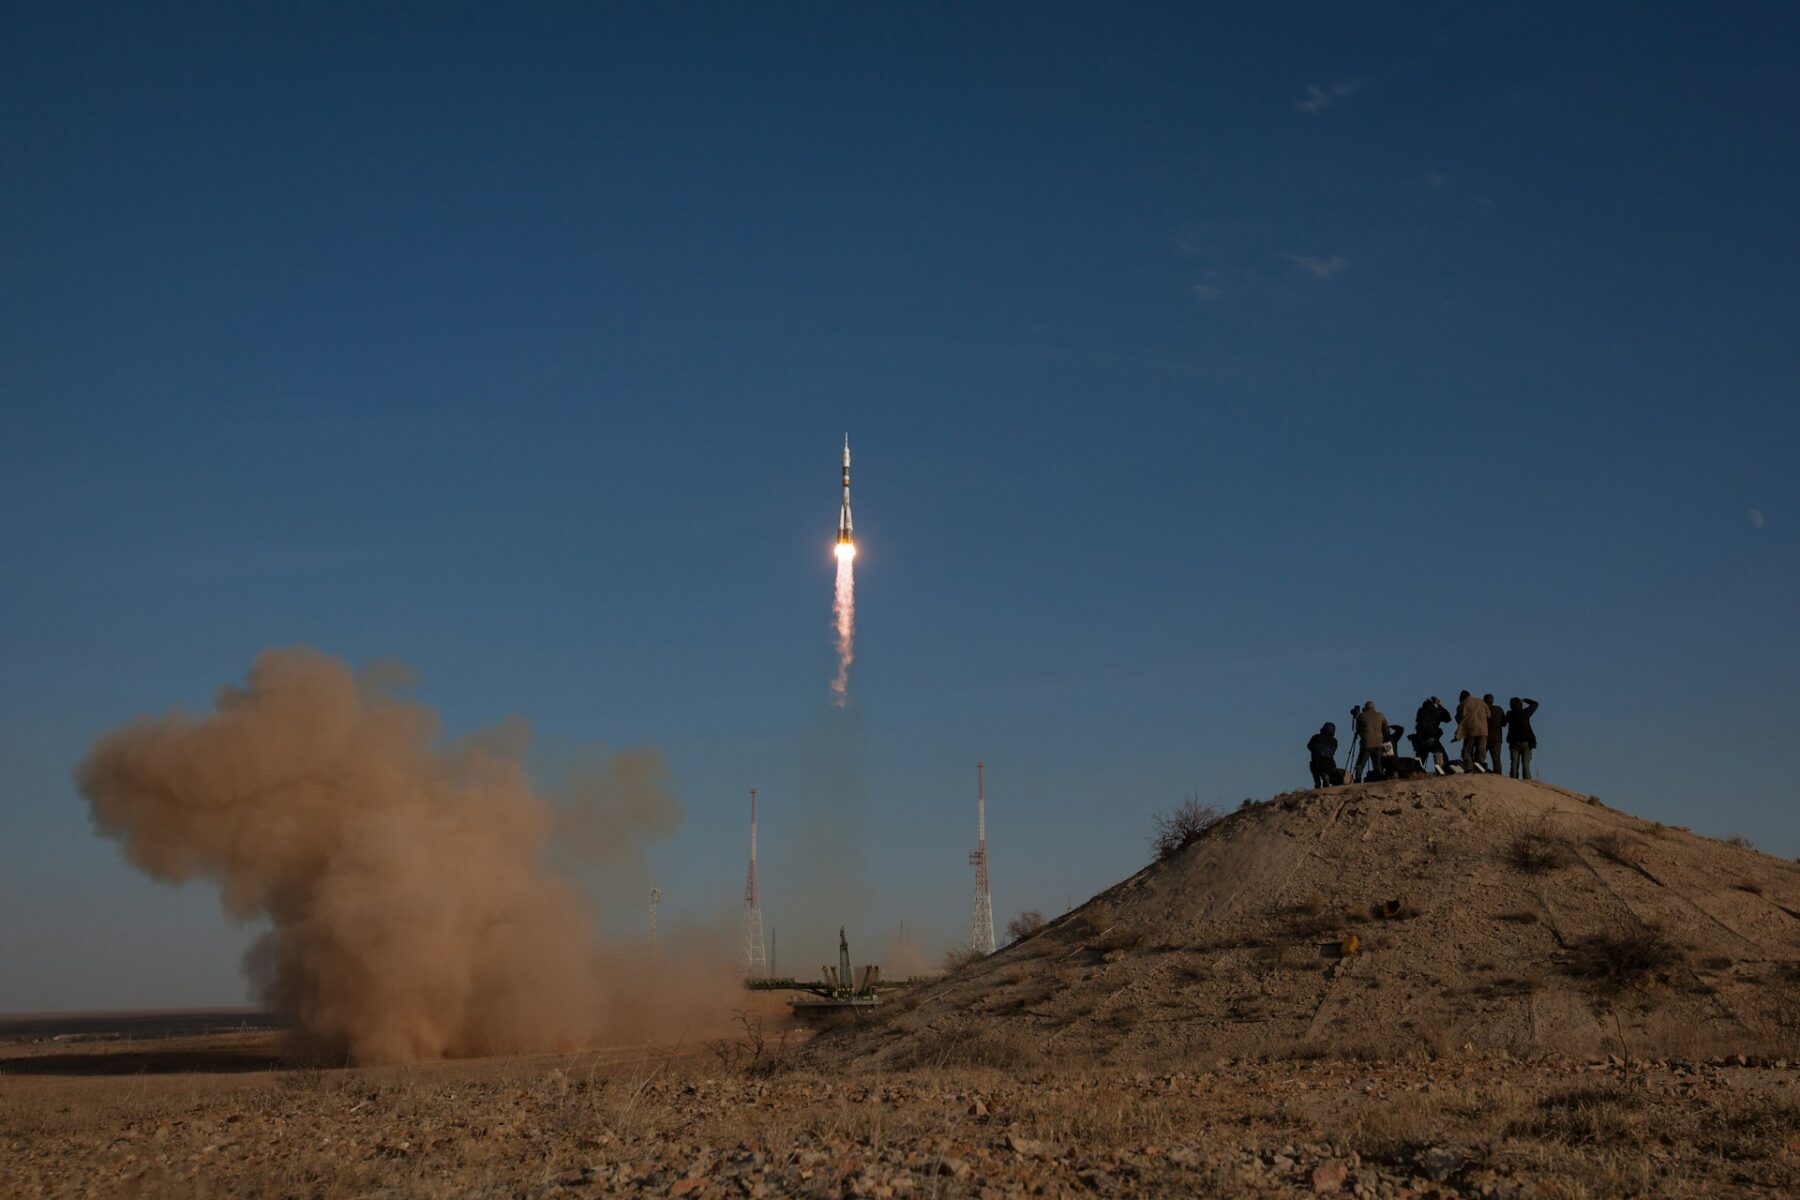 Image of a nasa rocket taking off at dusk with a group of people watching from a hill in a sandy, desert like environment